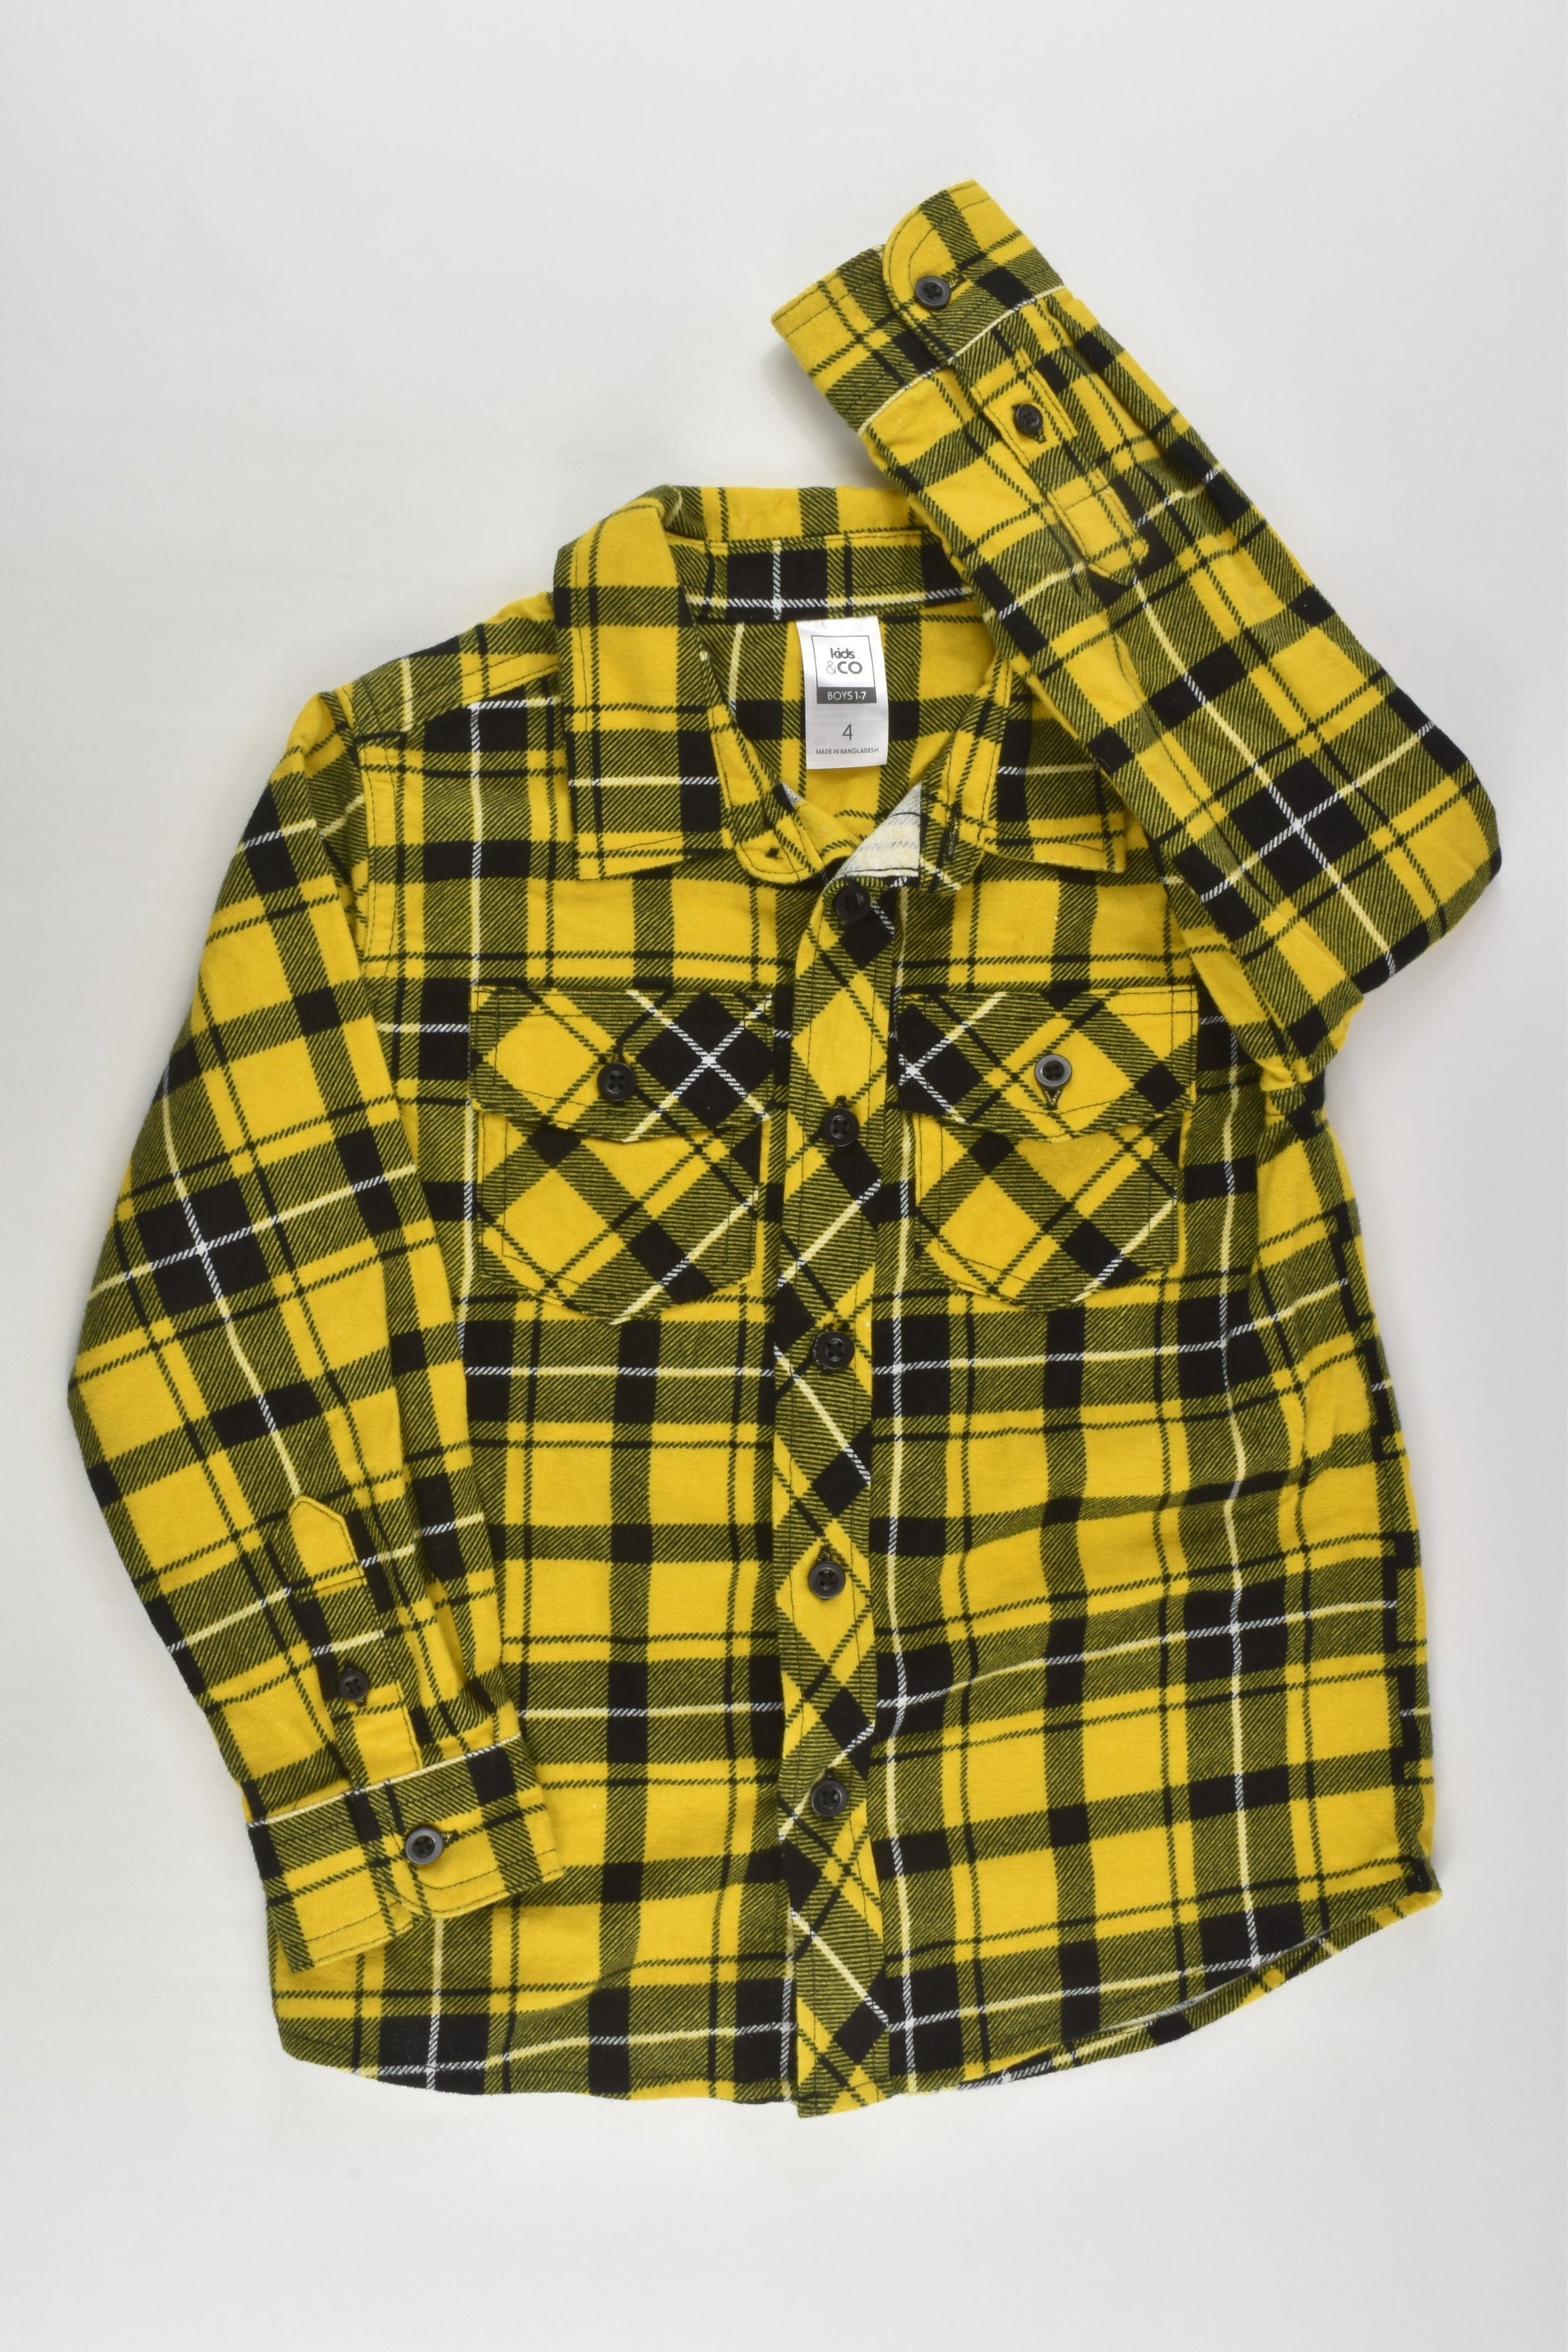 Kids & Co Size 4 Checked Casual Winter Shirt